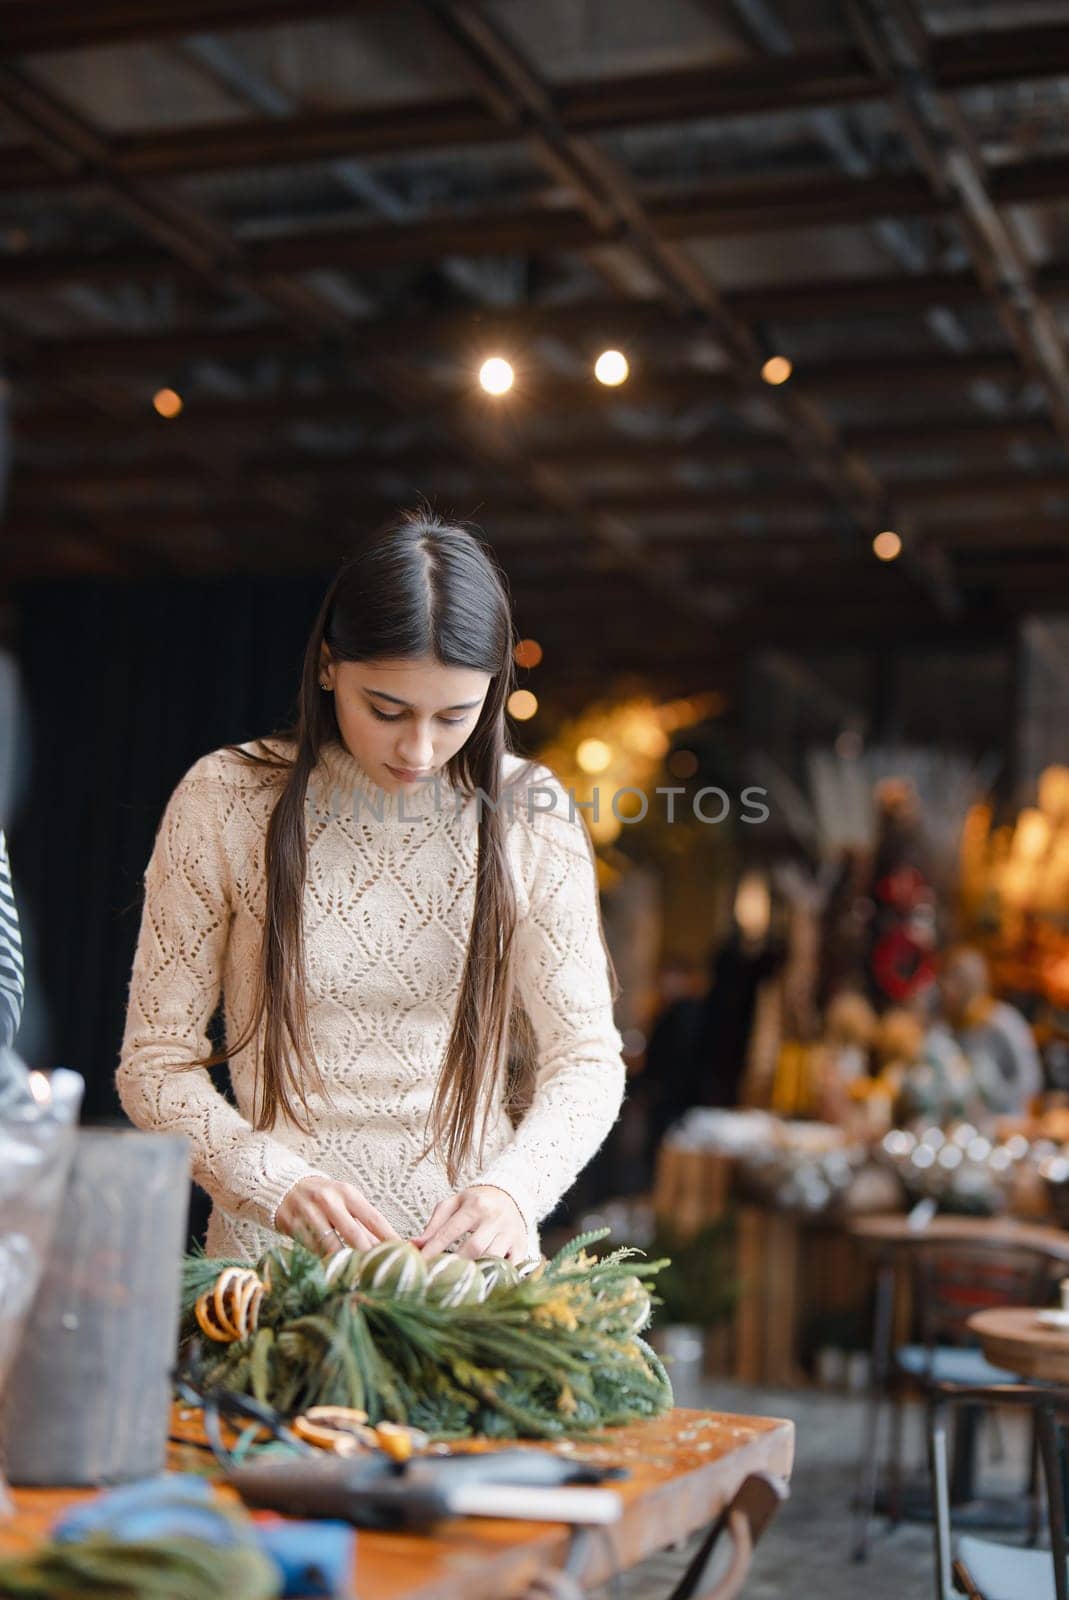 A charming young woman fully engaged in a Christmas decor crafting class. by teksomolika